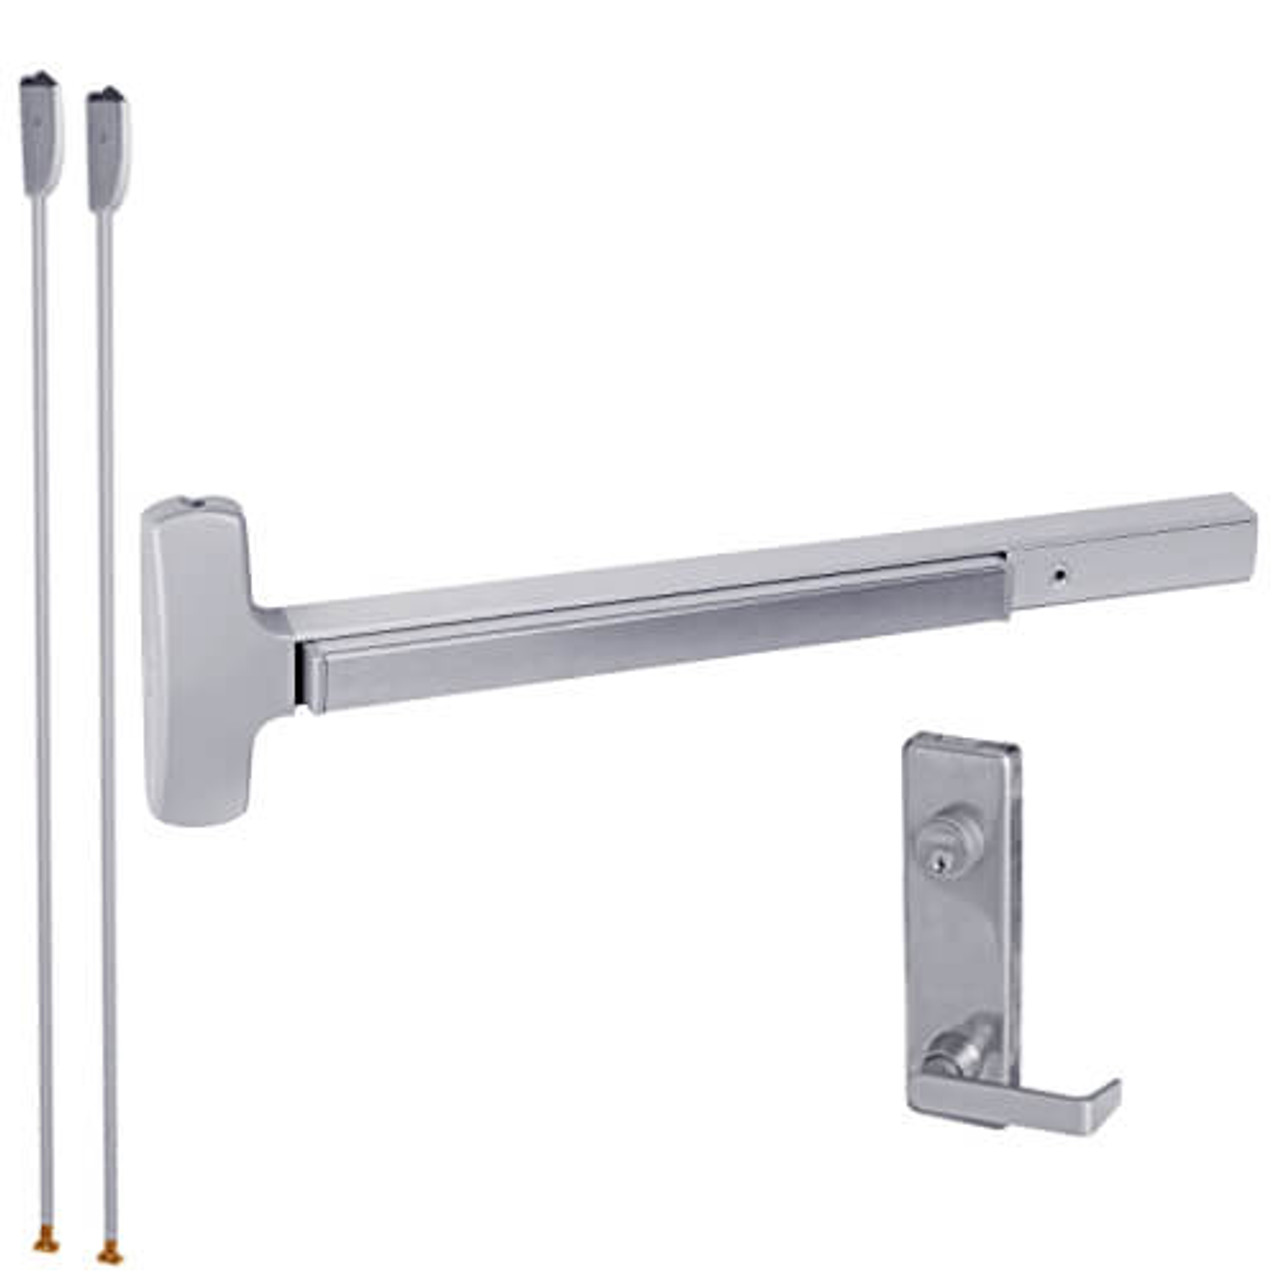 25-V-L-NL-DANE-US32-4-LHR Falcon Exit Device in Polished Stainless Steel